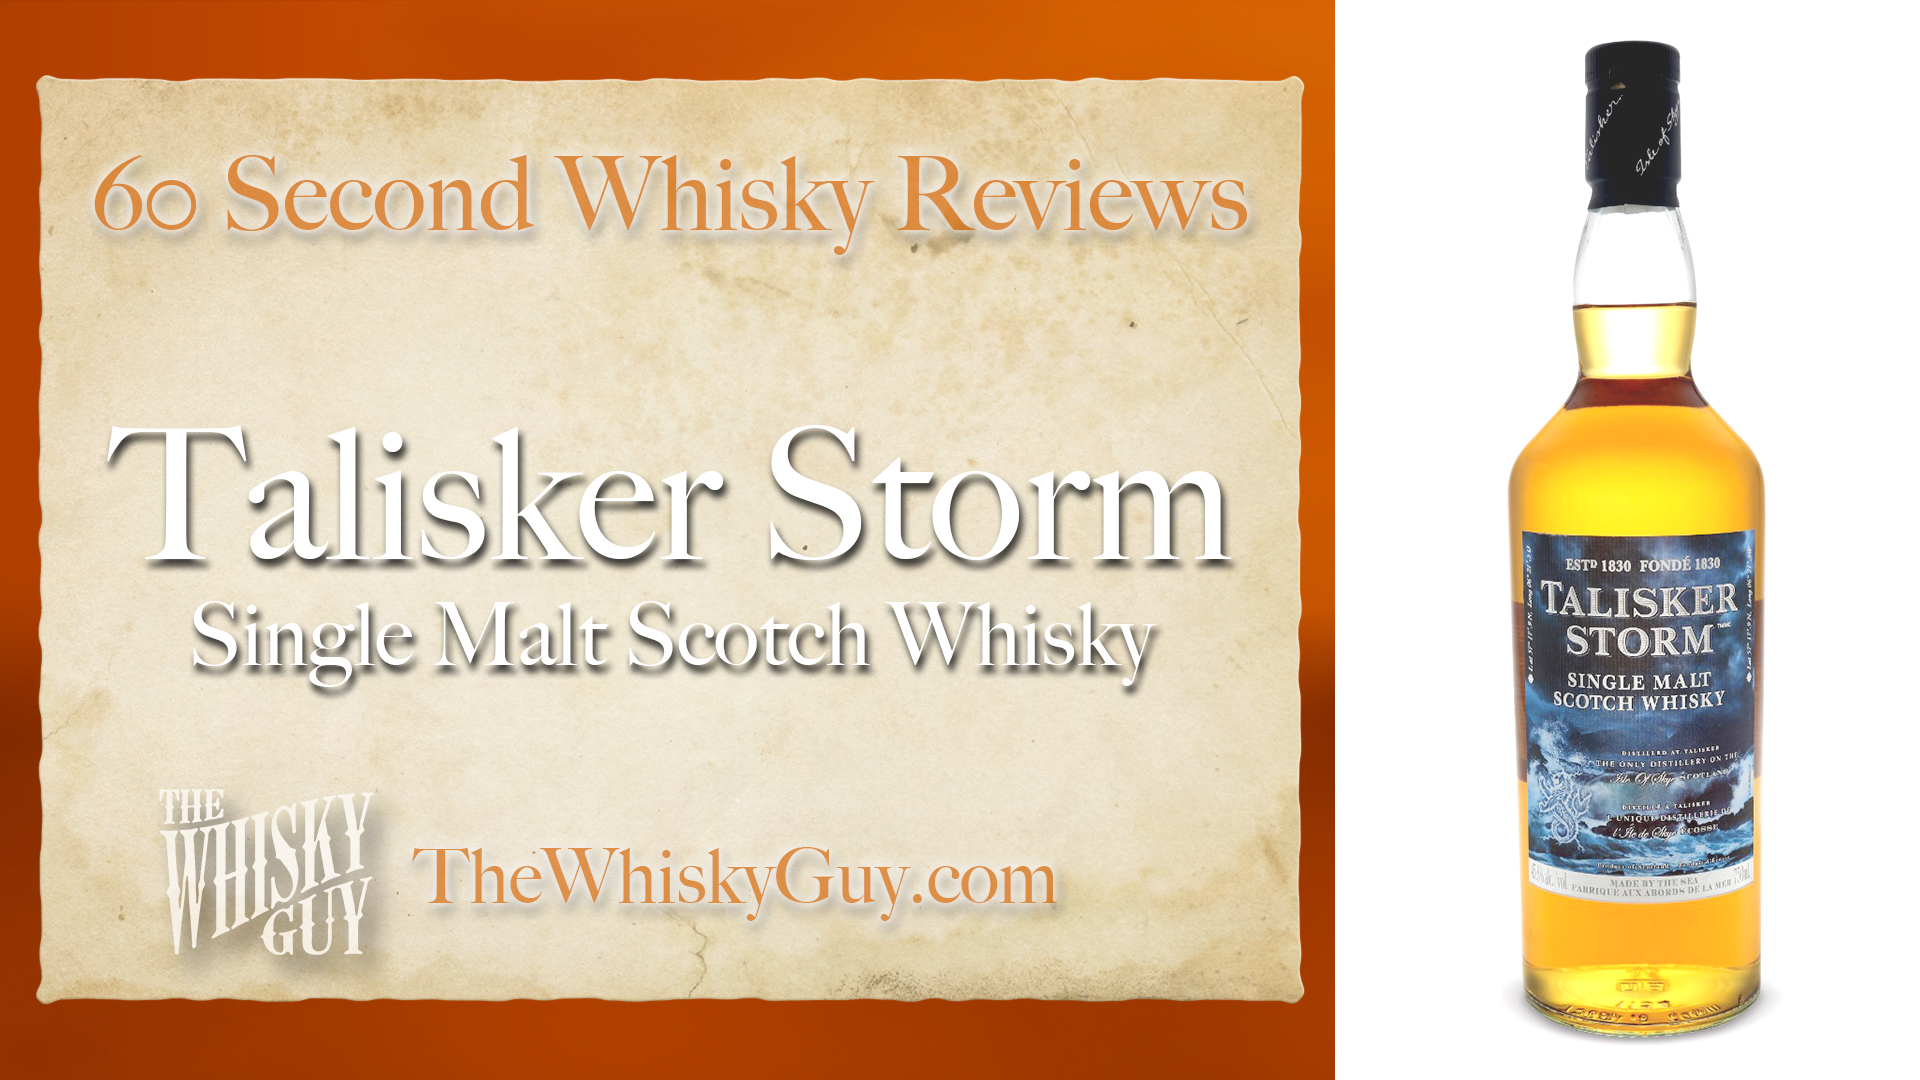 Does Talisker Storm Single Malt Scotch Whisky belong in your liquor cabinet? Is it worth the price at the bar? Give The Whisky Guy 60 seconds and find out! In just 60 seconds, The Whisky Guy reviews Irish Whiskey, Scotch Whisky, Single Malt, Canadian Whisky, Bourbon Whiskey, Japanese Whisky and other whiskies from around the world. Find more at TheWhiskyGuy.com. All original content © Ari Shapiro - TheWhiskyGuy.com